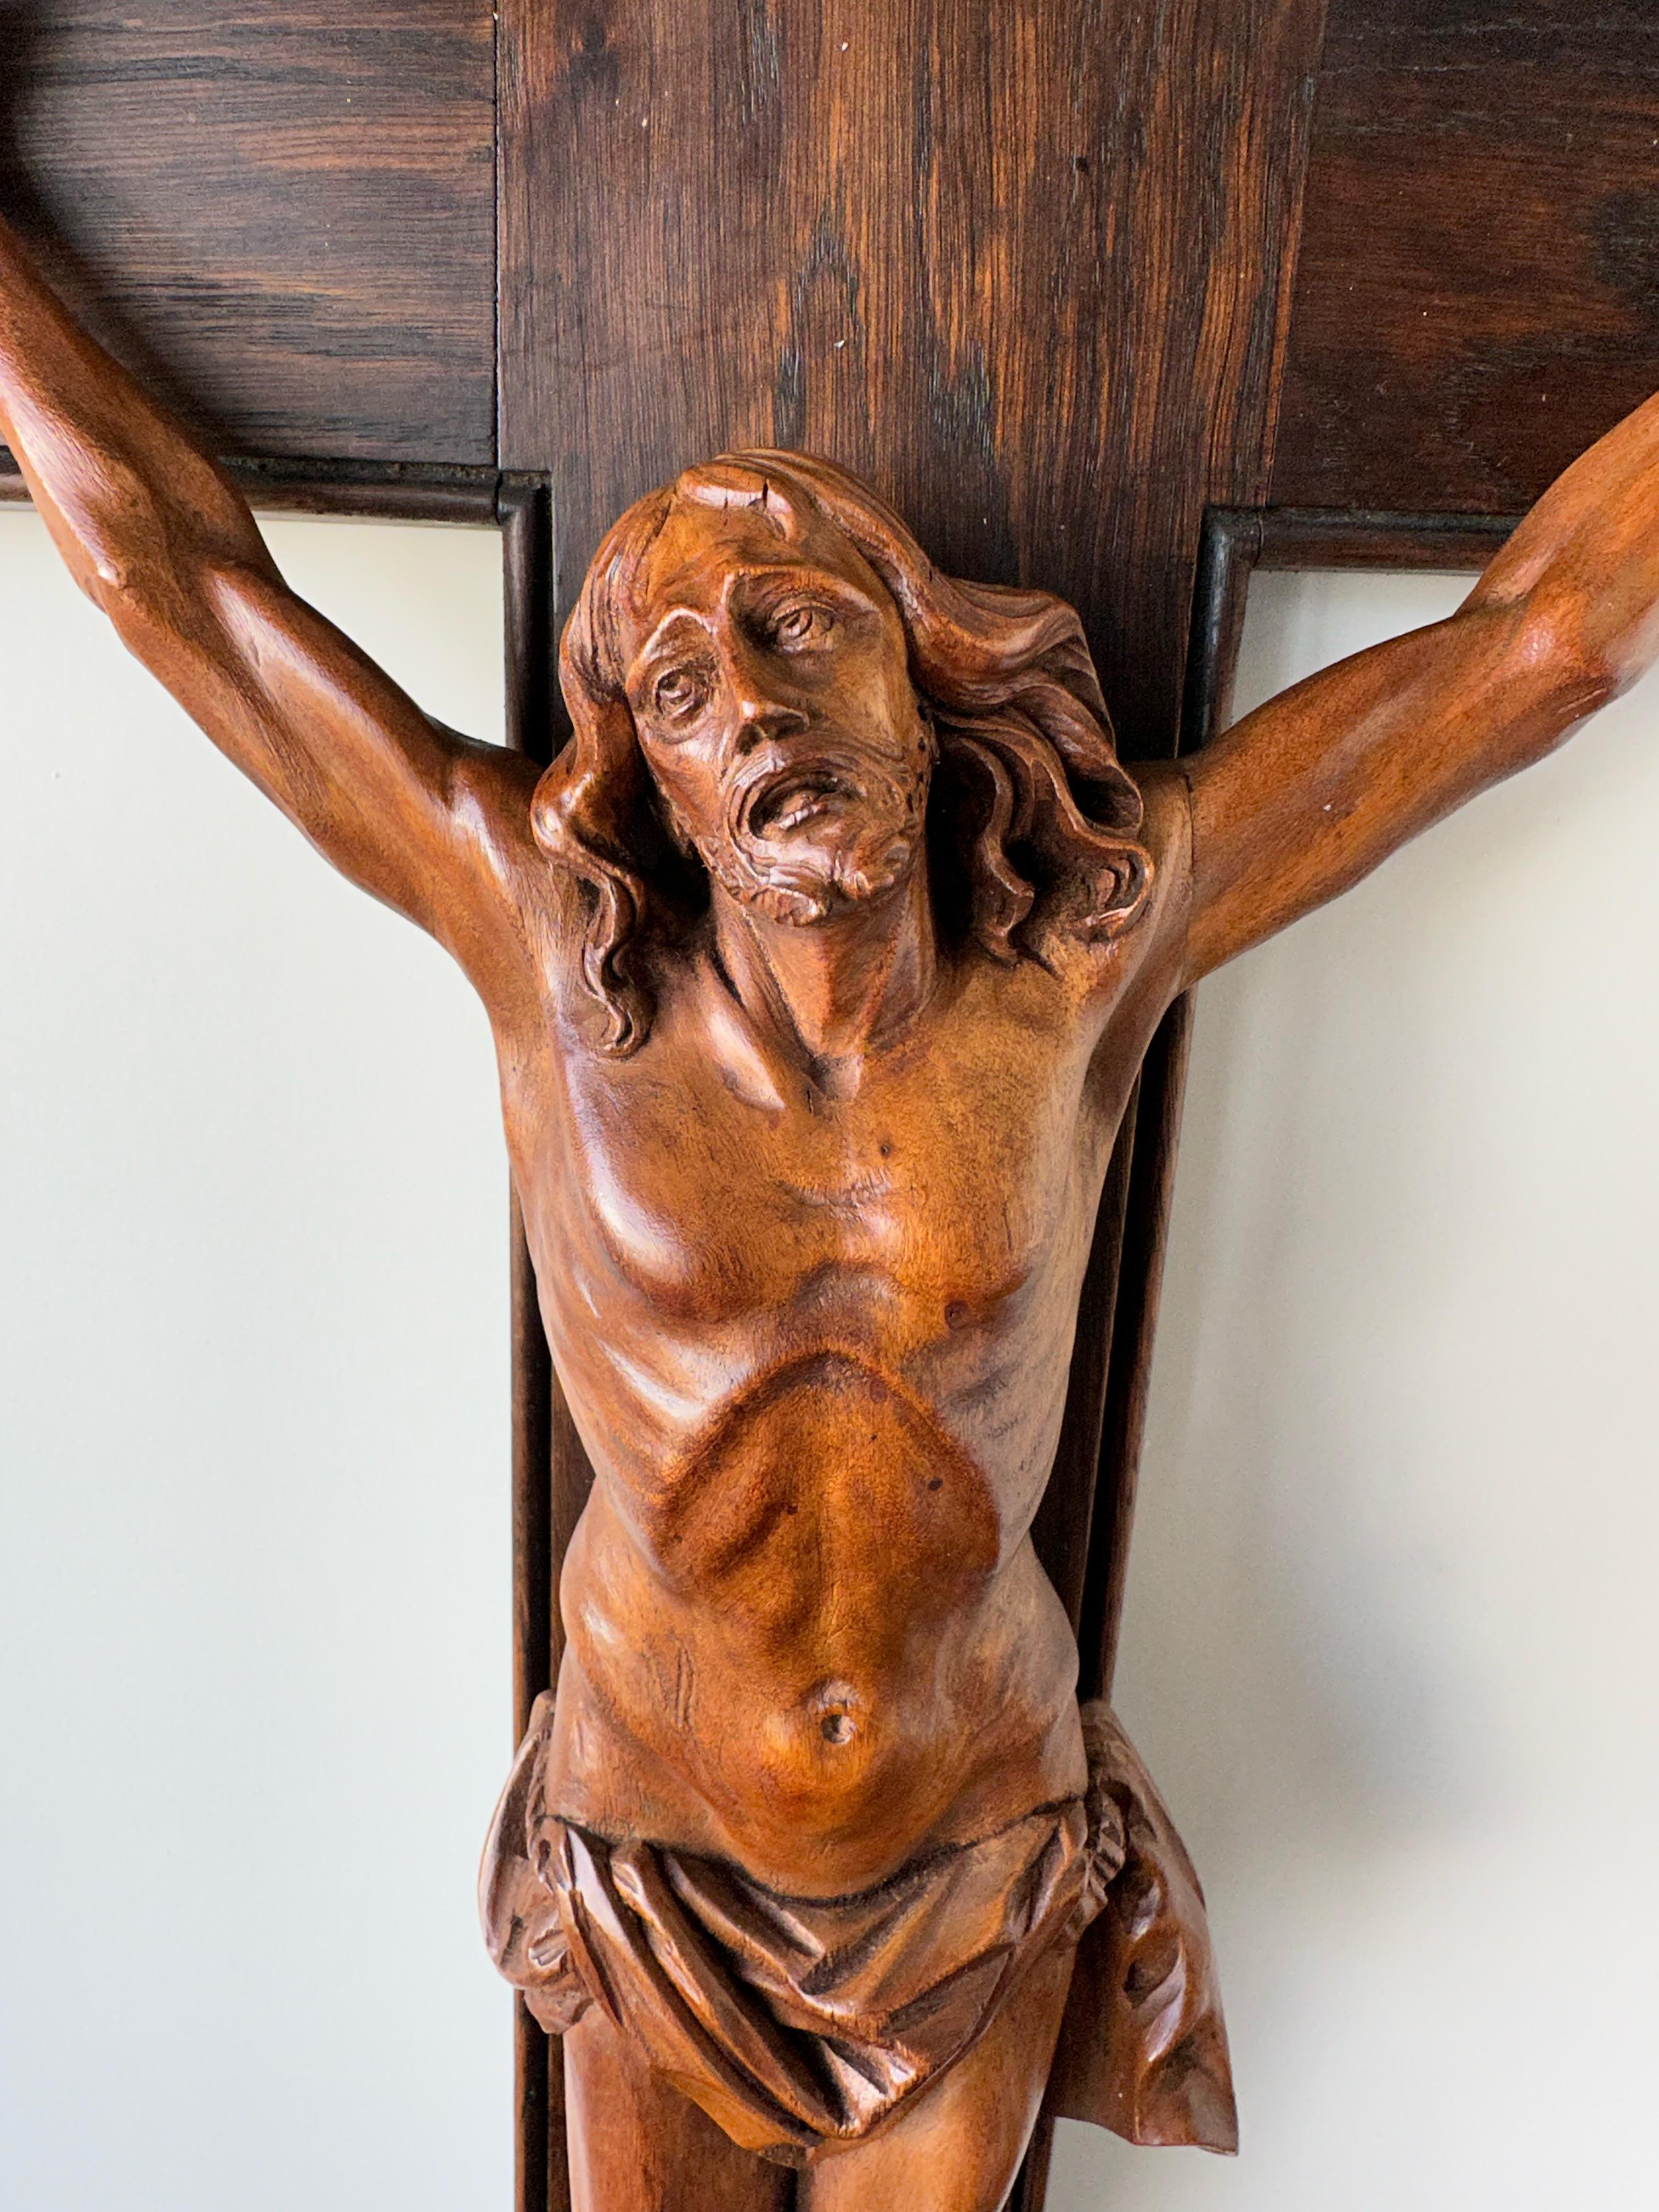 Antique crucifix with stunning hand carved details and an amazing patina.

This remarkable and good size crucifix with a sculpture of a suffering Christ on the cross is another one of our recent great finds. The artist who hand-carved this